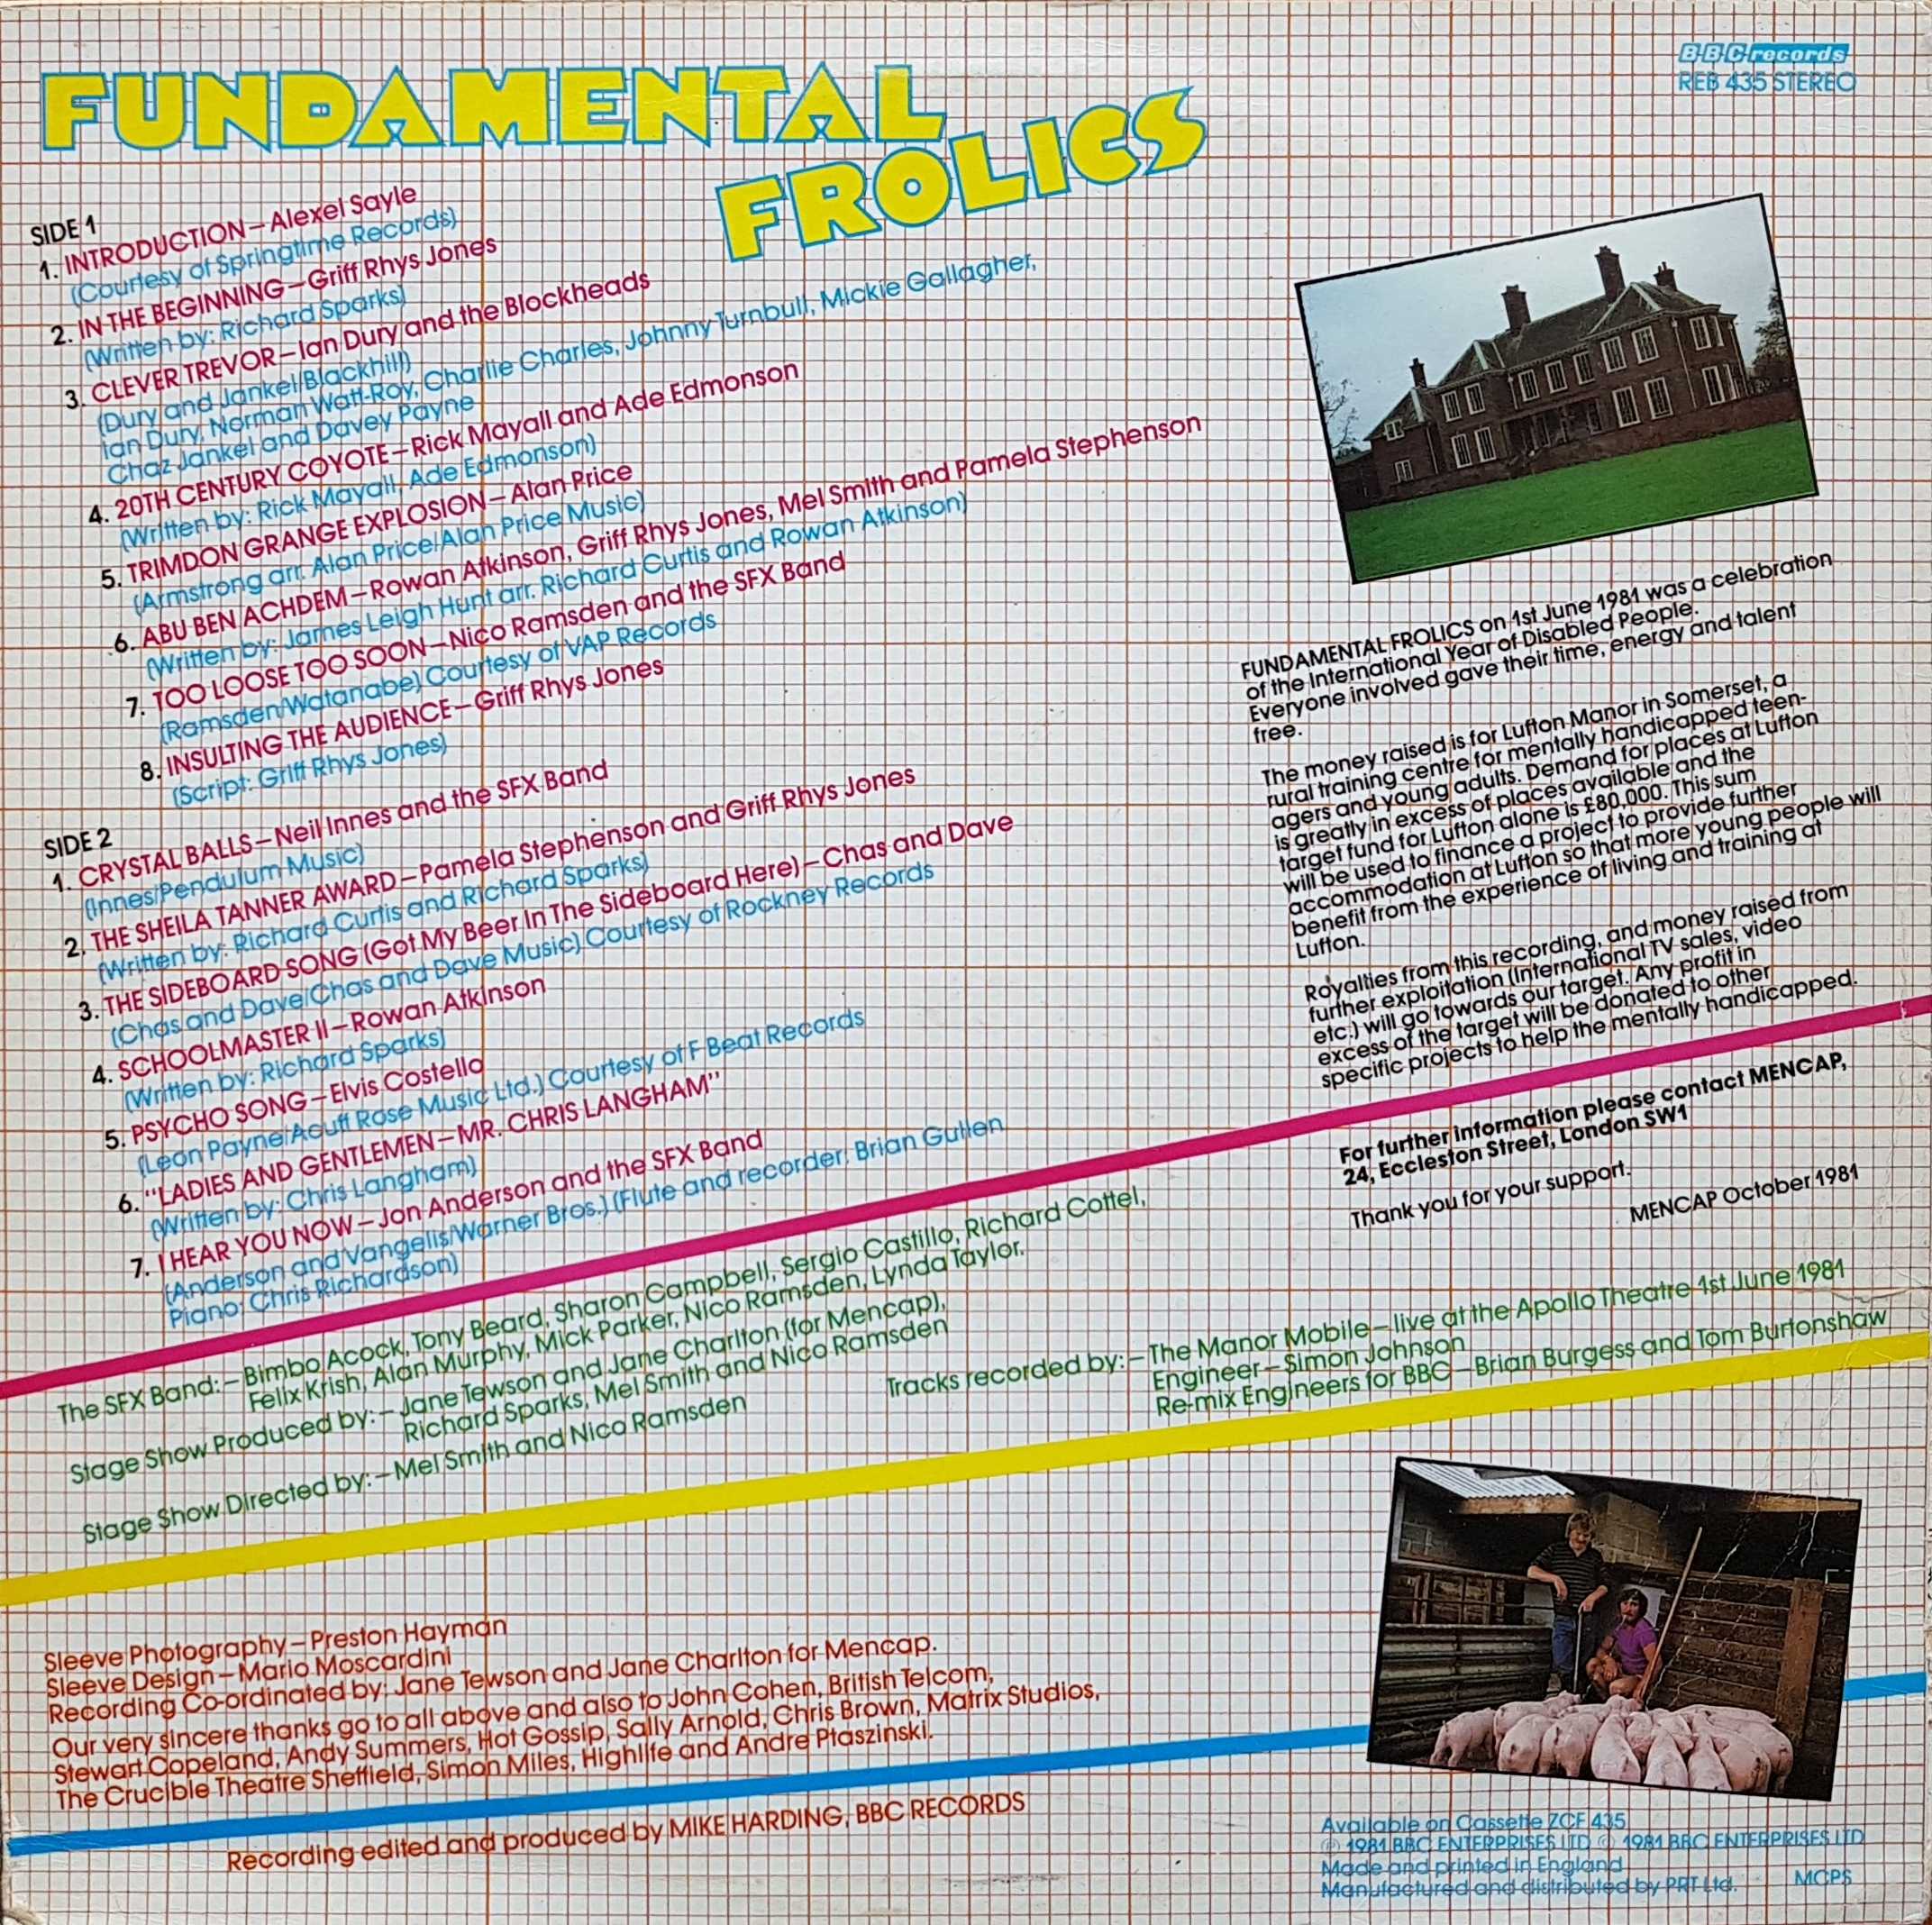 Picture of REB 435 Fundamental frolics by artist Various from the BBC records and Tapes library